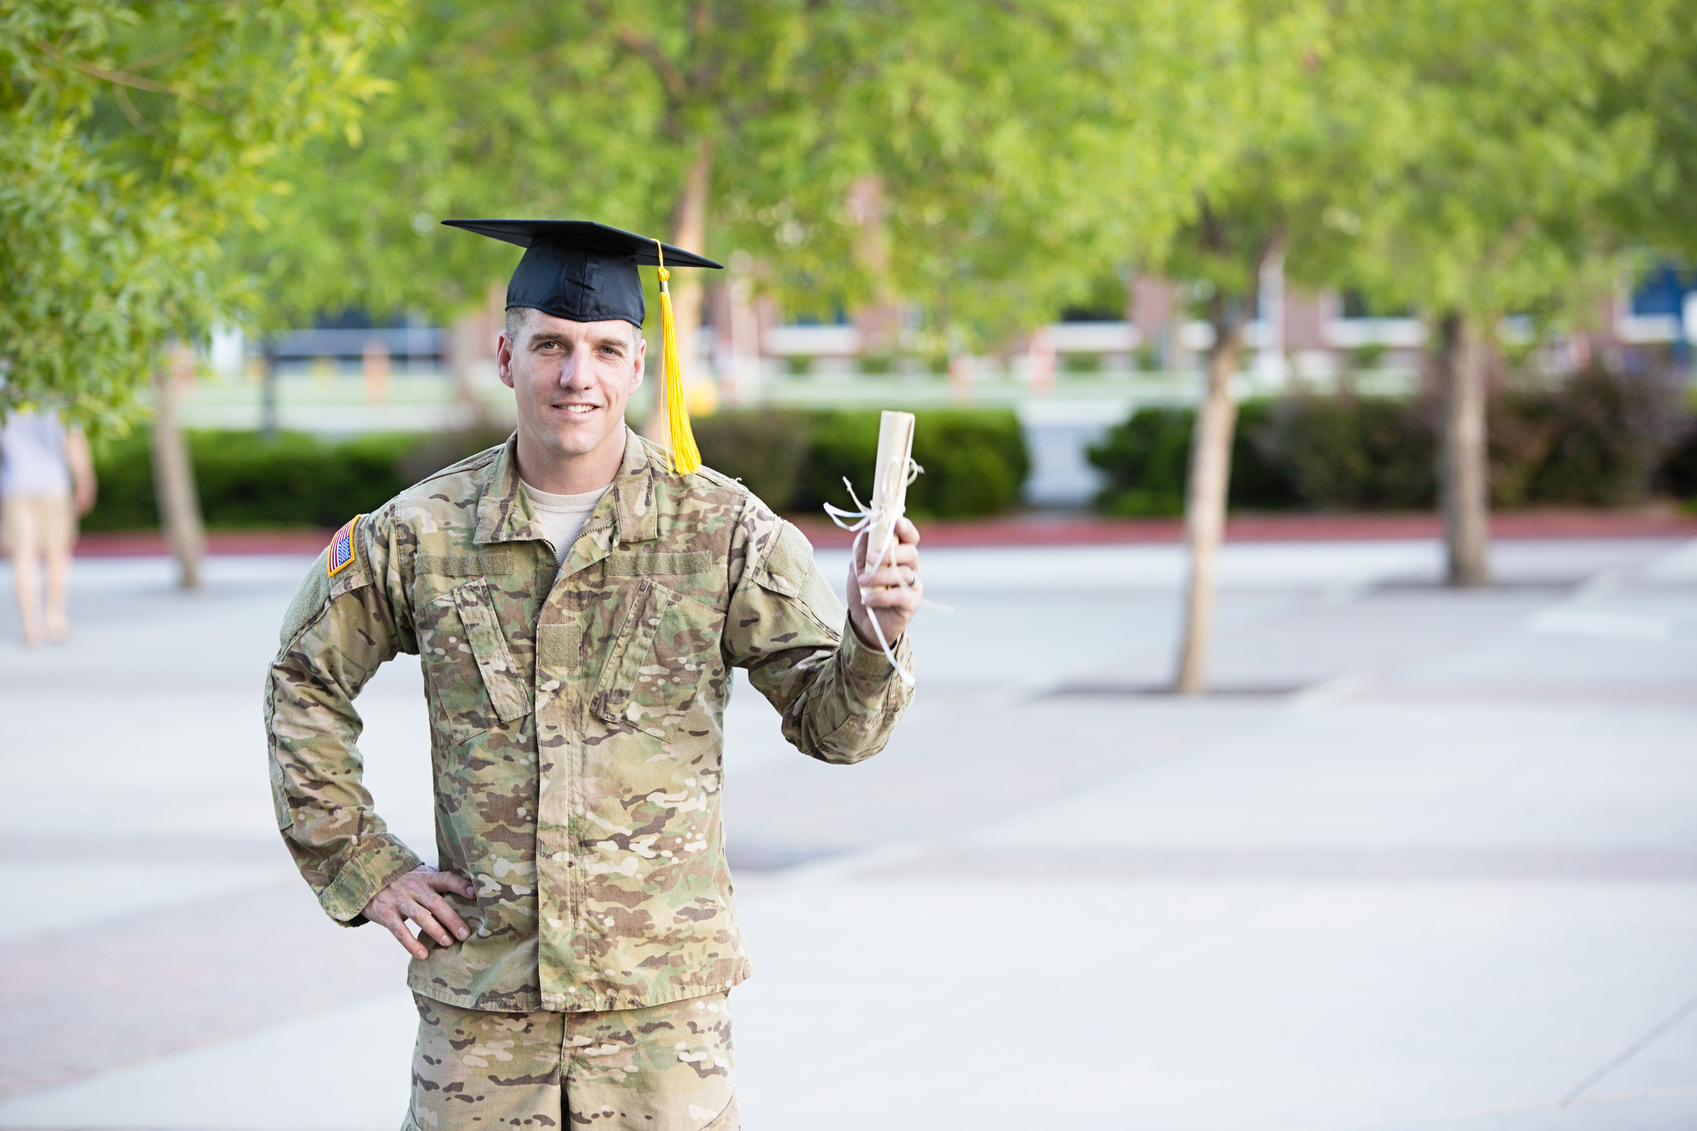 A service member in fatigues wearing a graduation cap holding a diploma.